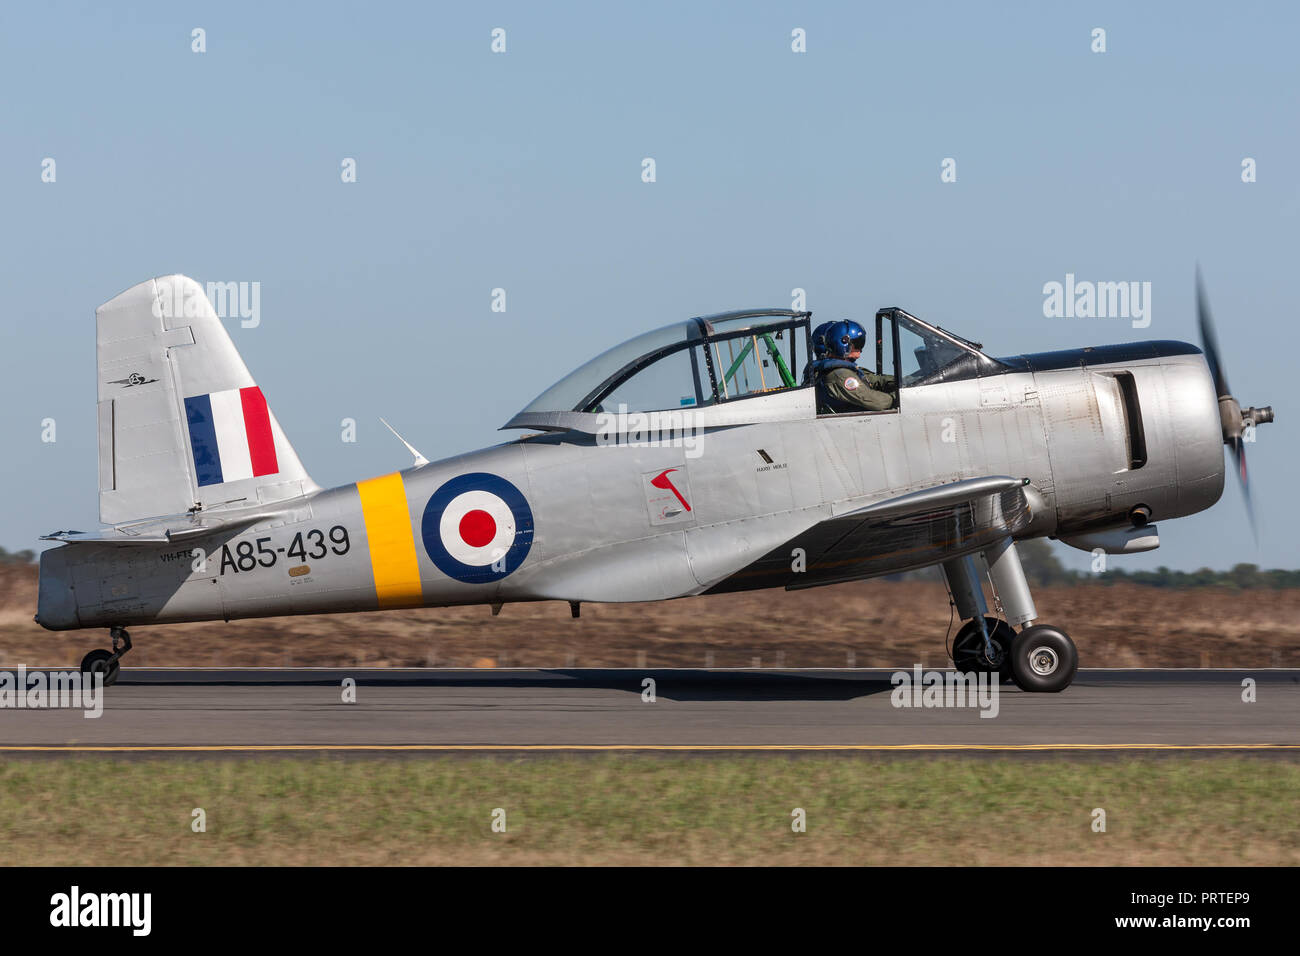 Former Royal Australian Air Force (RAAF) Commonwealth Aircraft Corporation (CAC) CA-25 Winjeel trainer aircraft VH-FTS operated by the RAAF Museum. Stock Photo